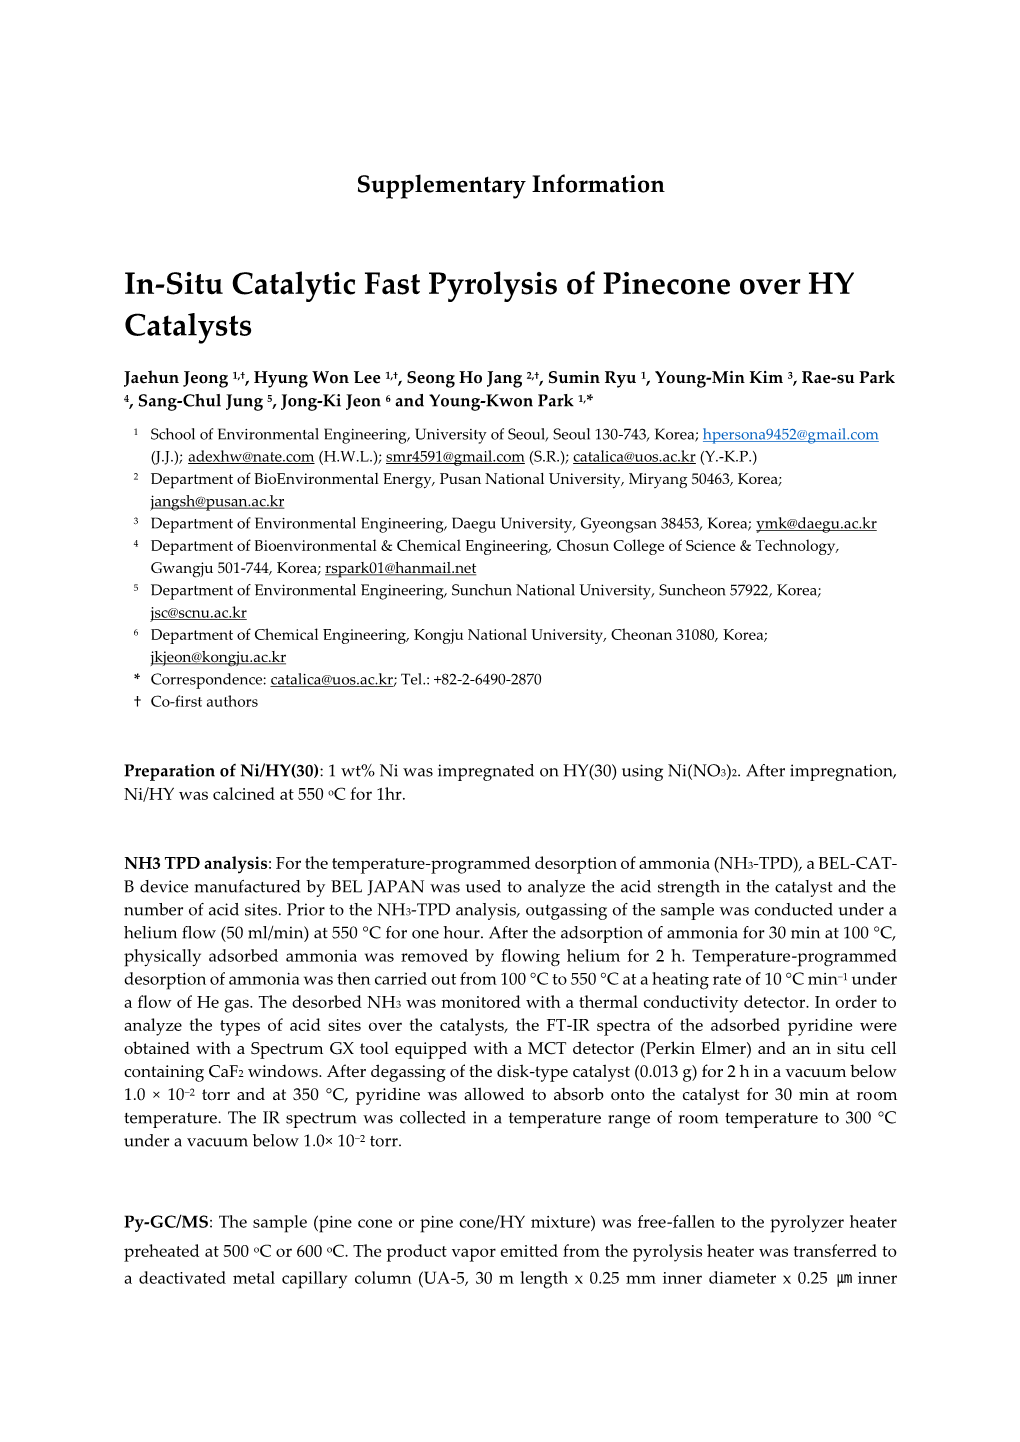 In-Situ Catalytic Fast Pyrolysis of Pinecone Over HY Catalysts